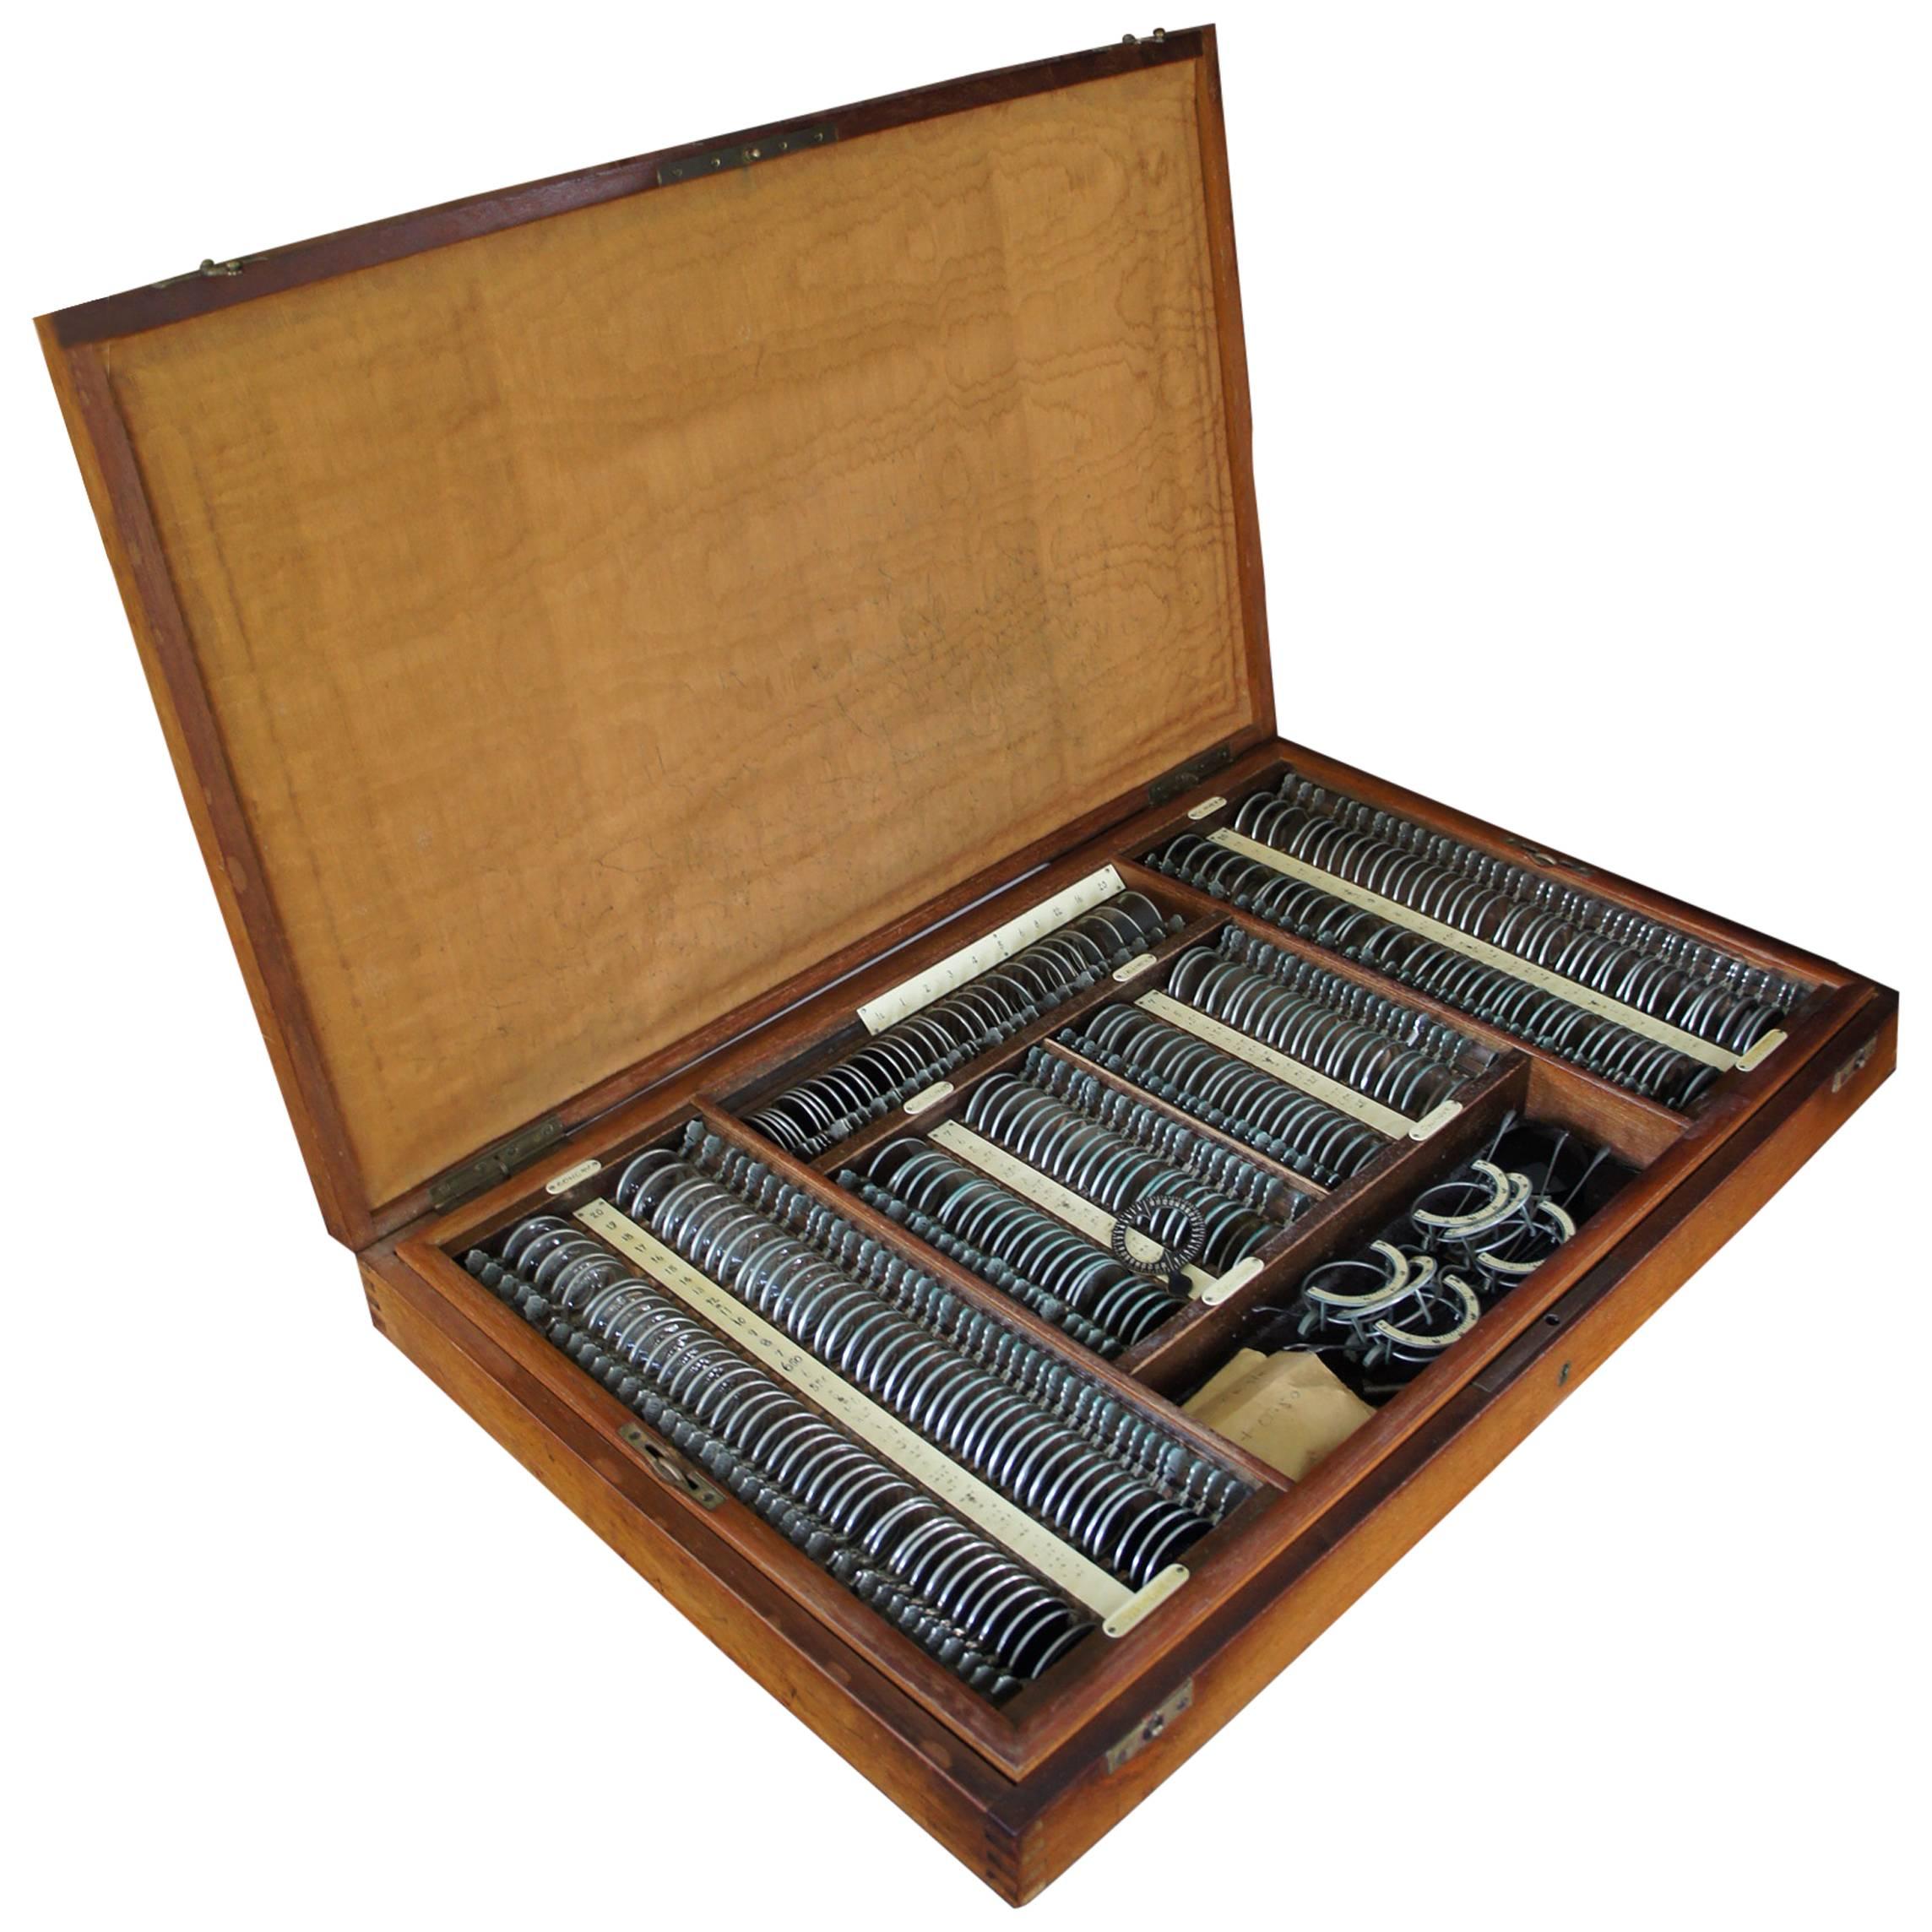 Magnificent Teak Wood Case with Optometrist Instruments for Eyesight Measurement